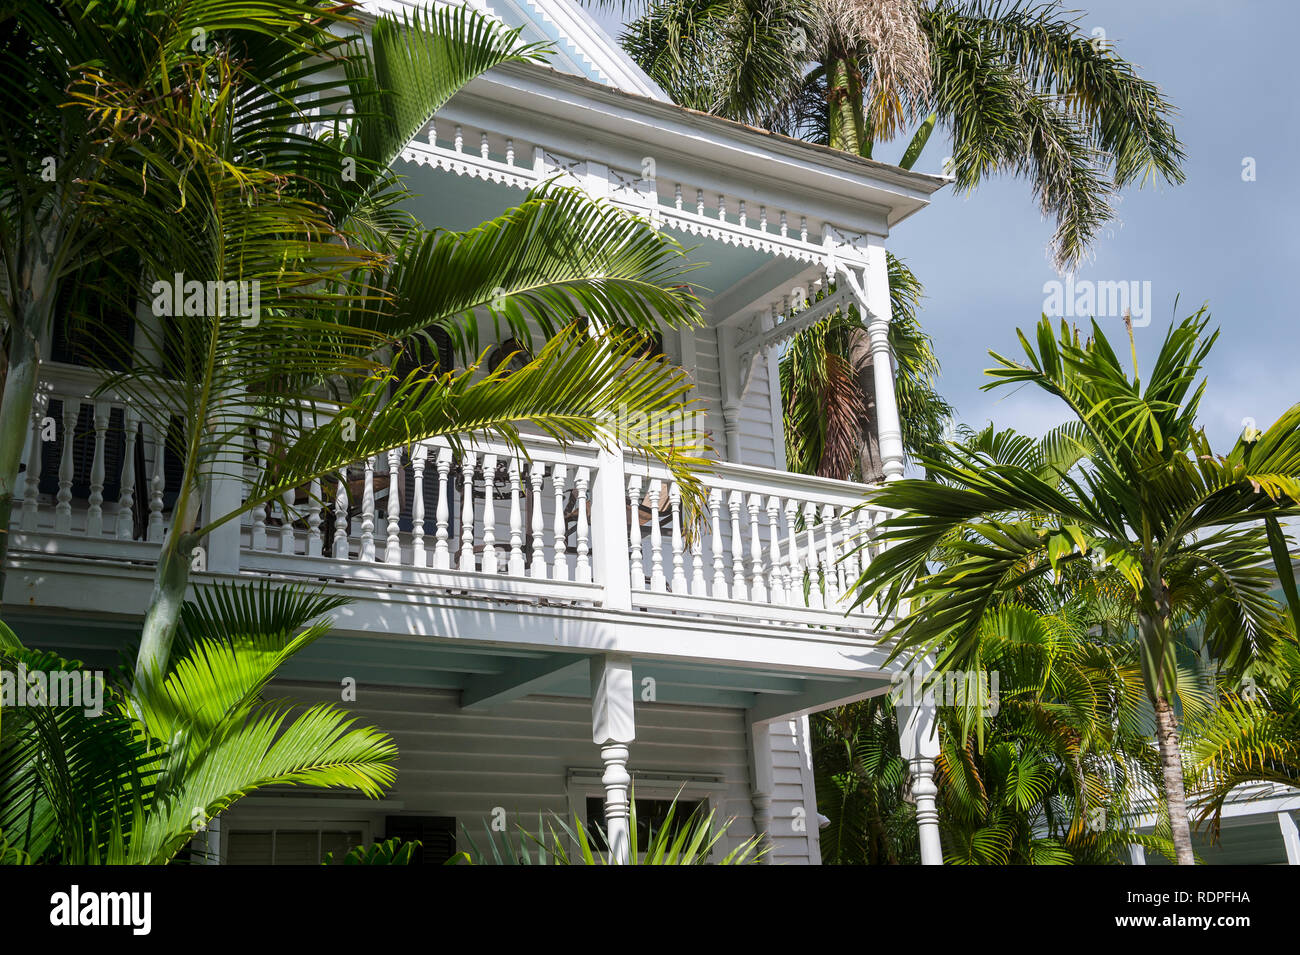 Scenic view of typical wooden conch house with patio overlooking palm-lined  street in Old Town, Key West, Florida, USA Stock Photo - Alamy